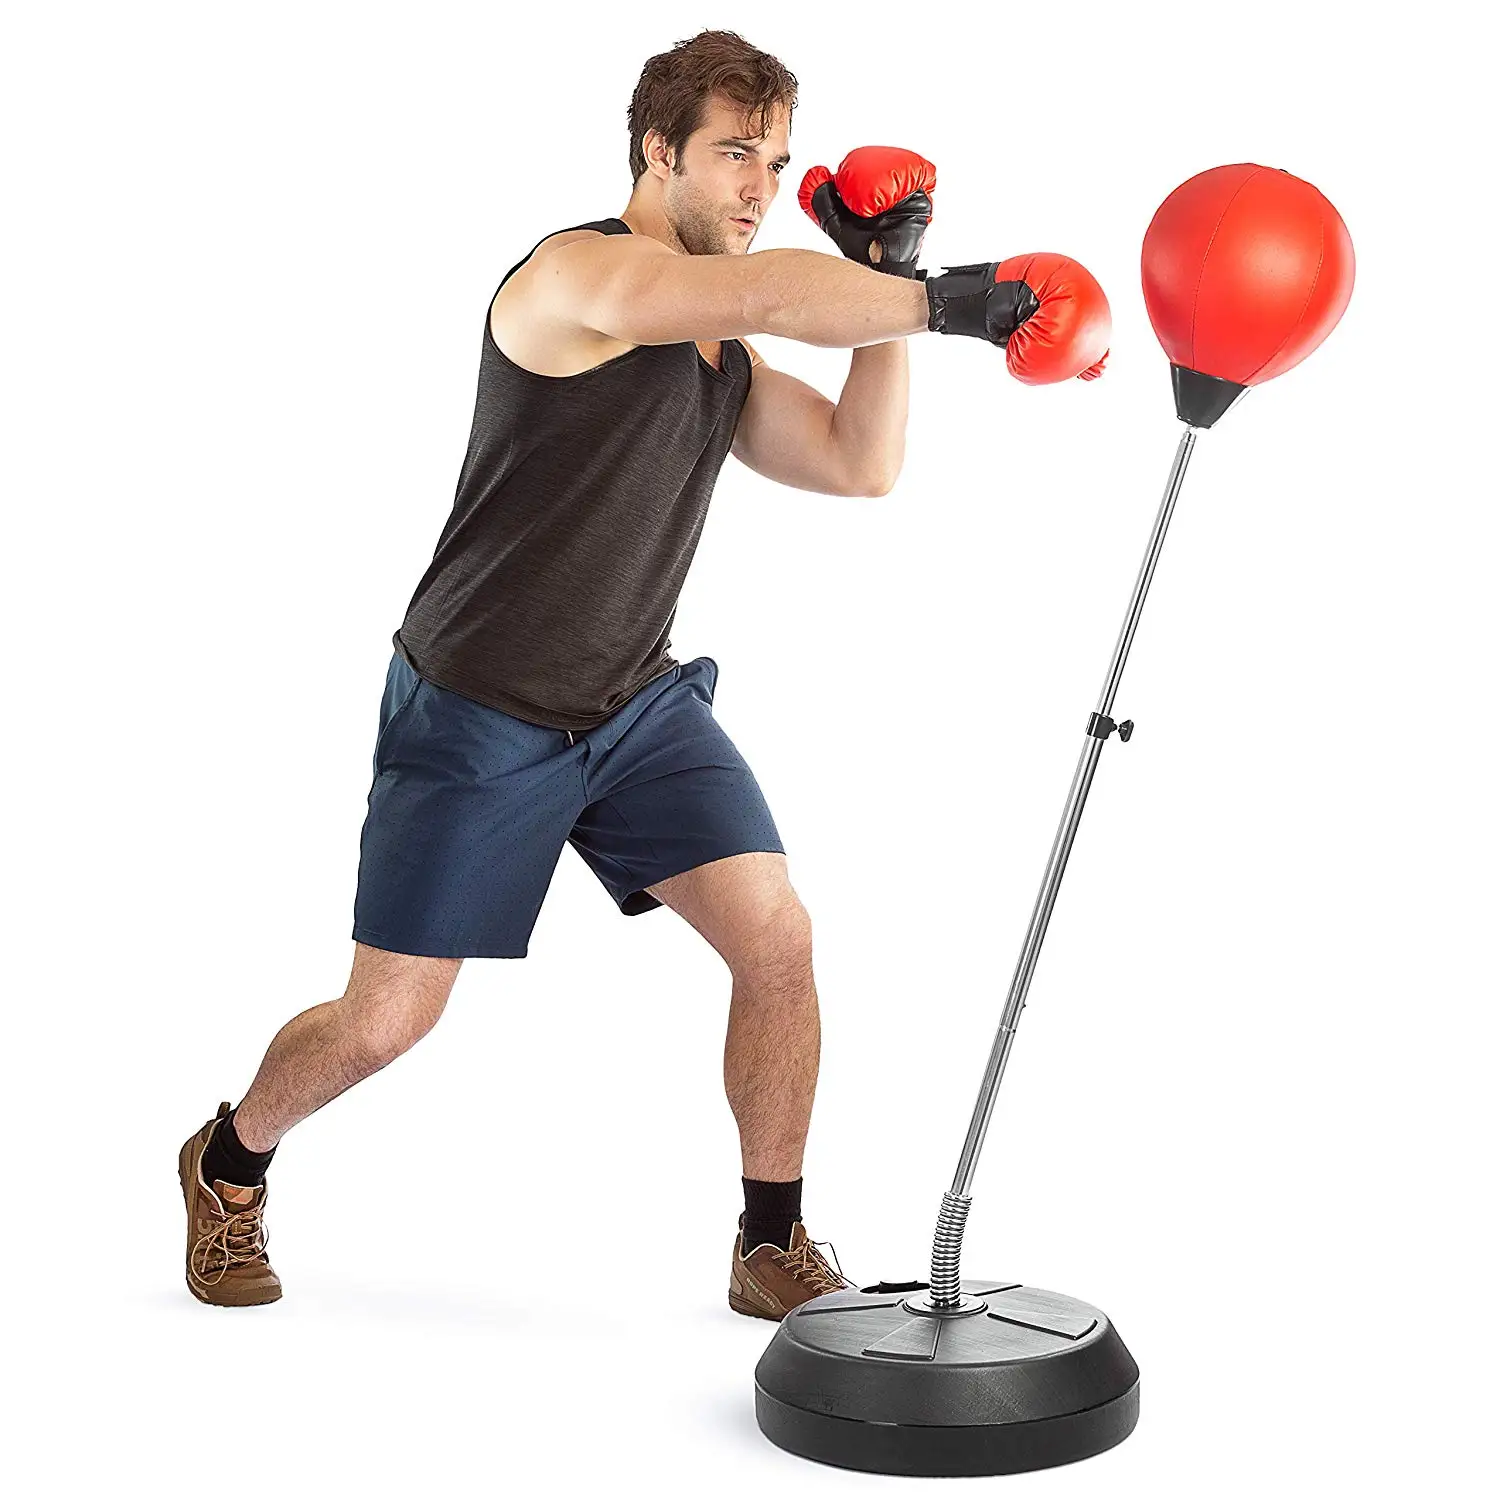 TurnerMAX 3way Stand Punch Bag Speedball Double-end Ball Boxing MMA Platform 